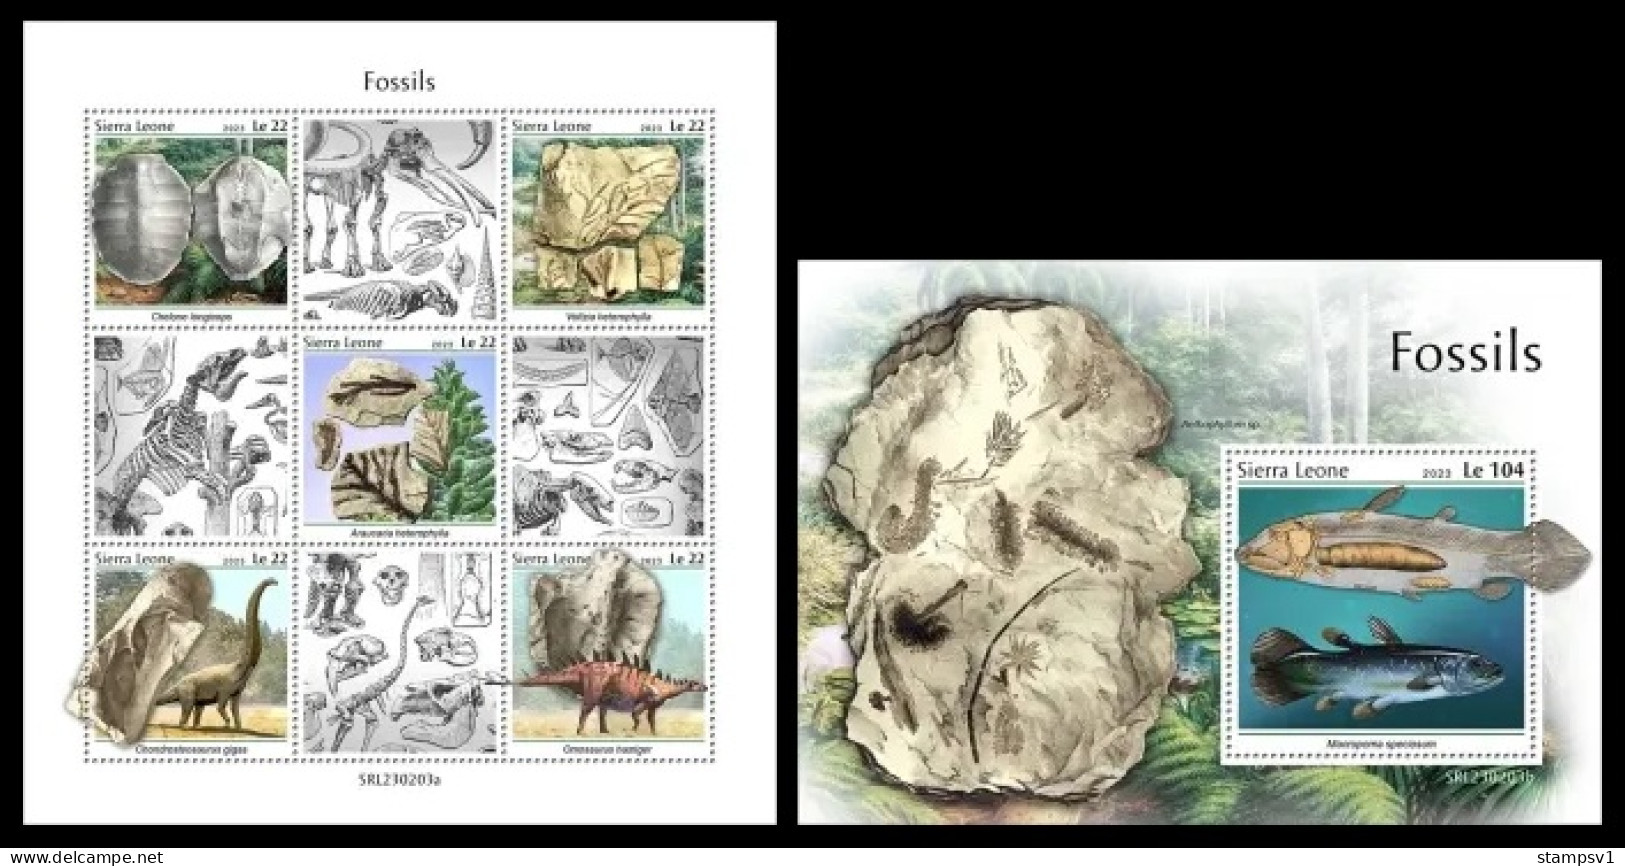 Sierra Leone 2023 Fossils. (203) OFFICIAL ISSUE - Fósiles